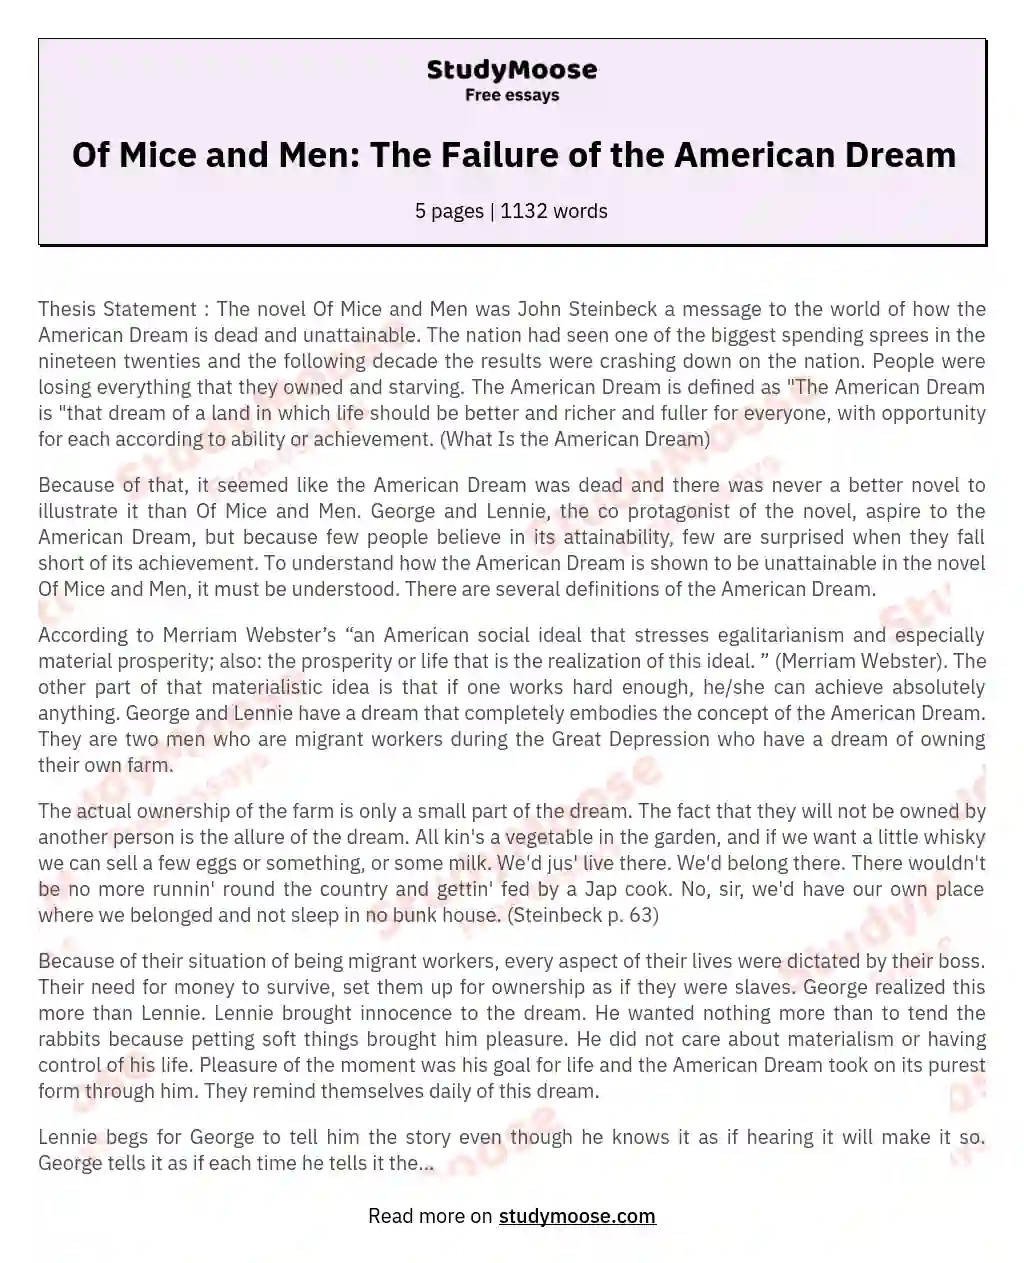 Of Mice and Men: The Failure of the American Dream essay